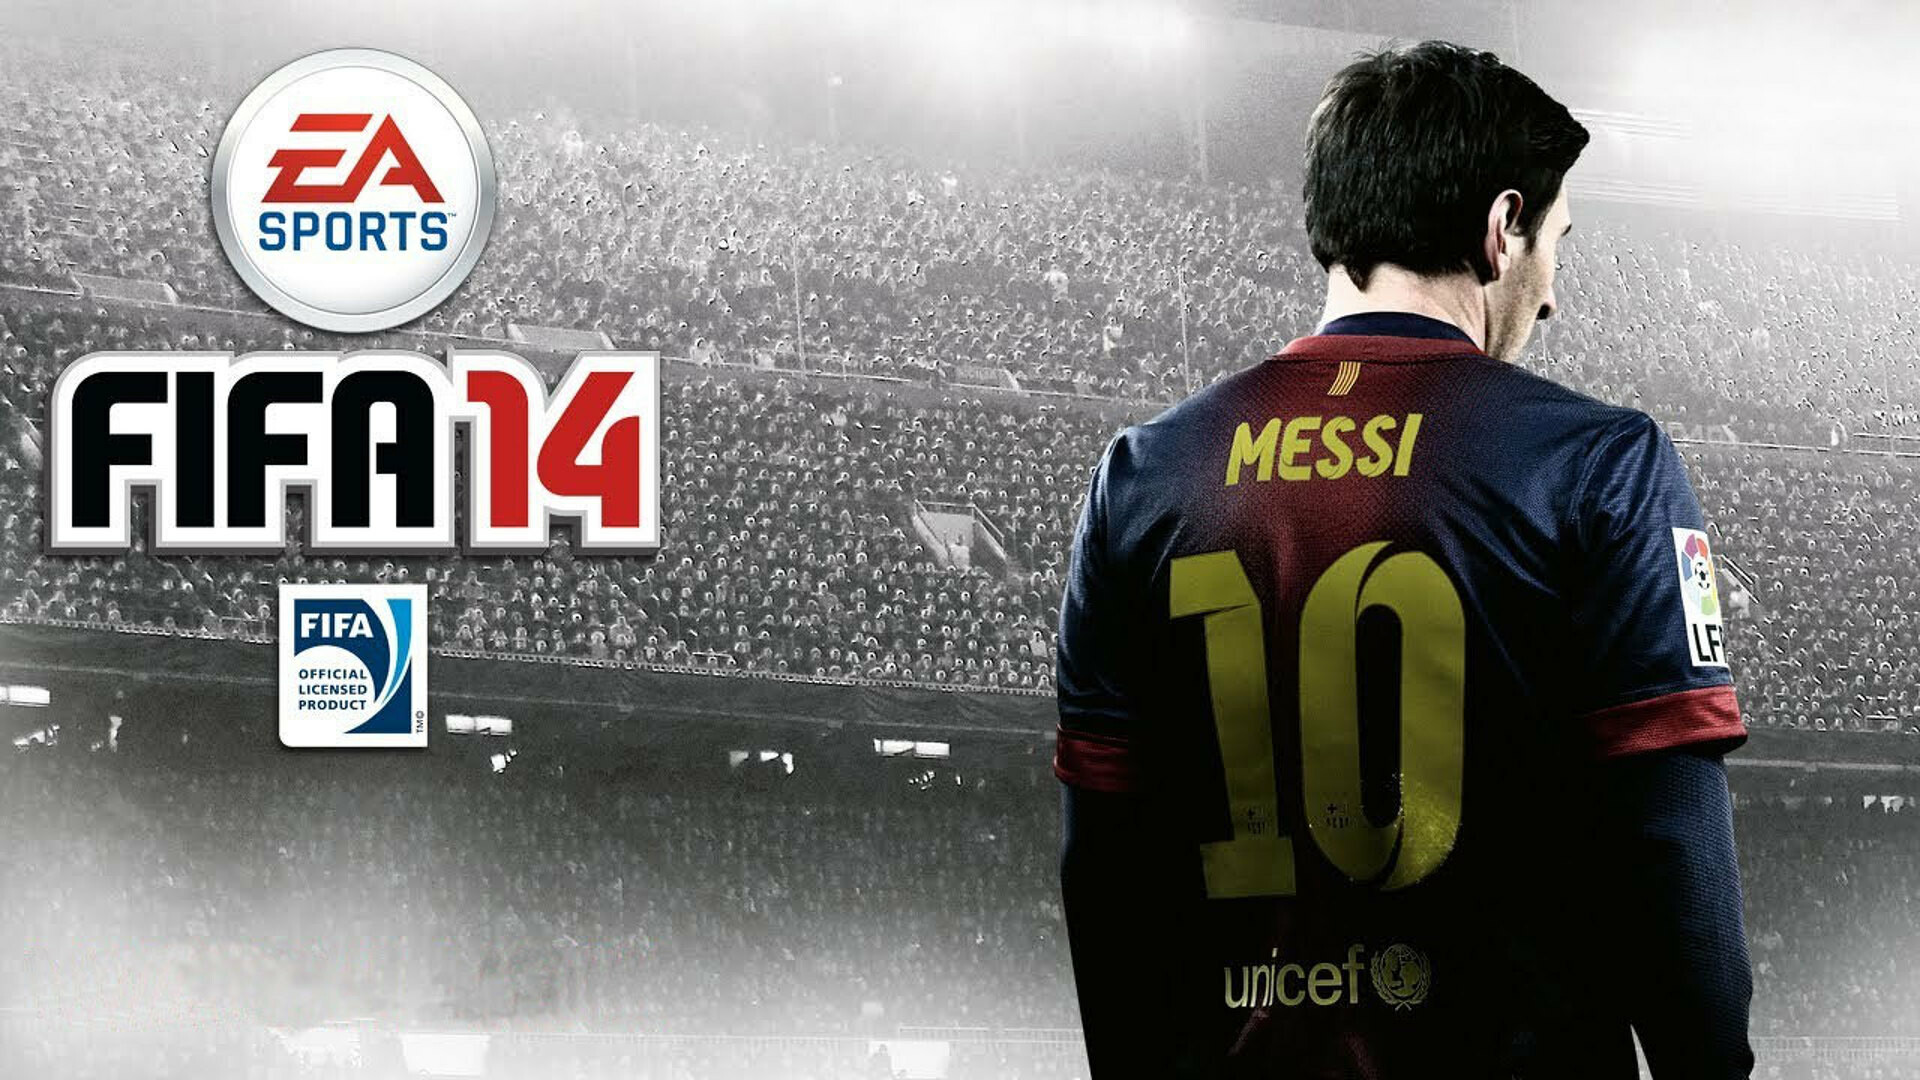 FIFA: Soccer game franchise, Messi, Iconic players. 1920x1080 Full HD Wallpaper.